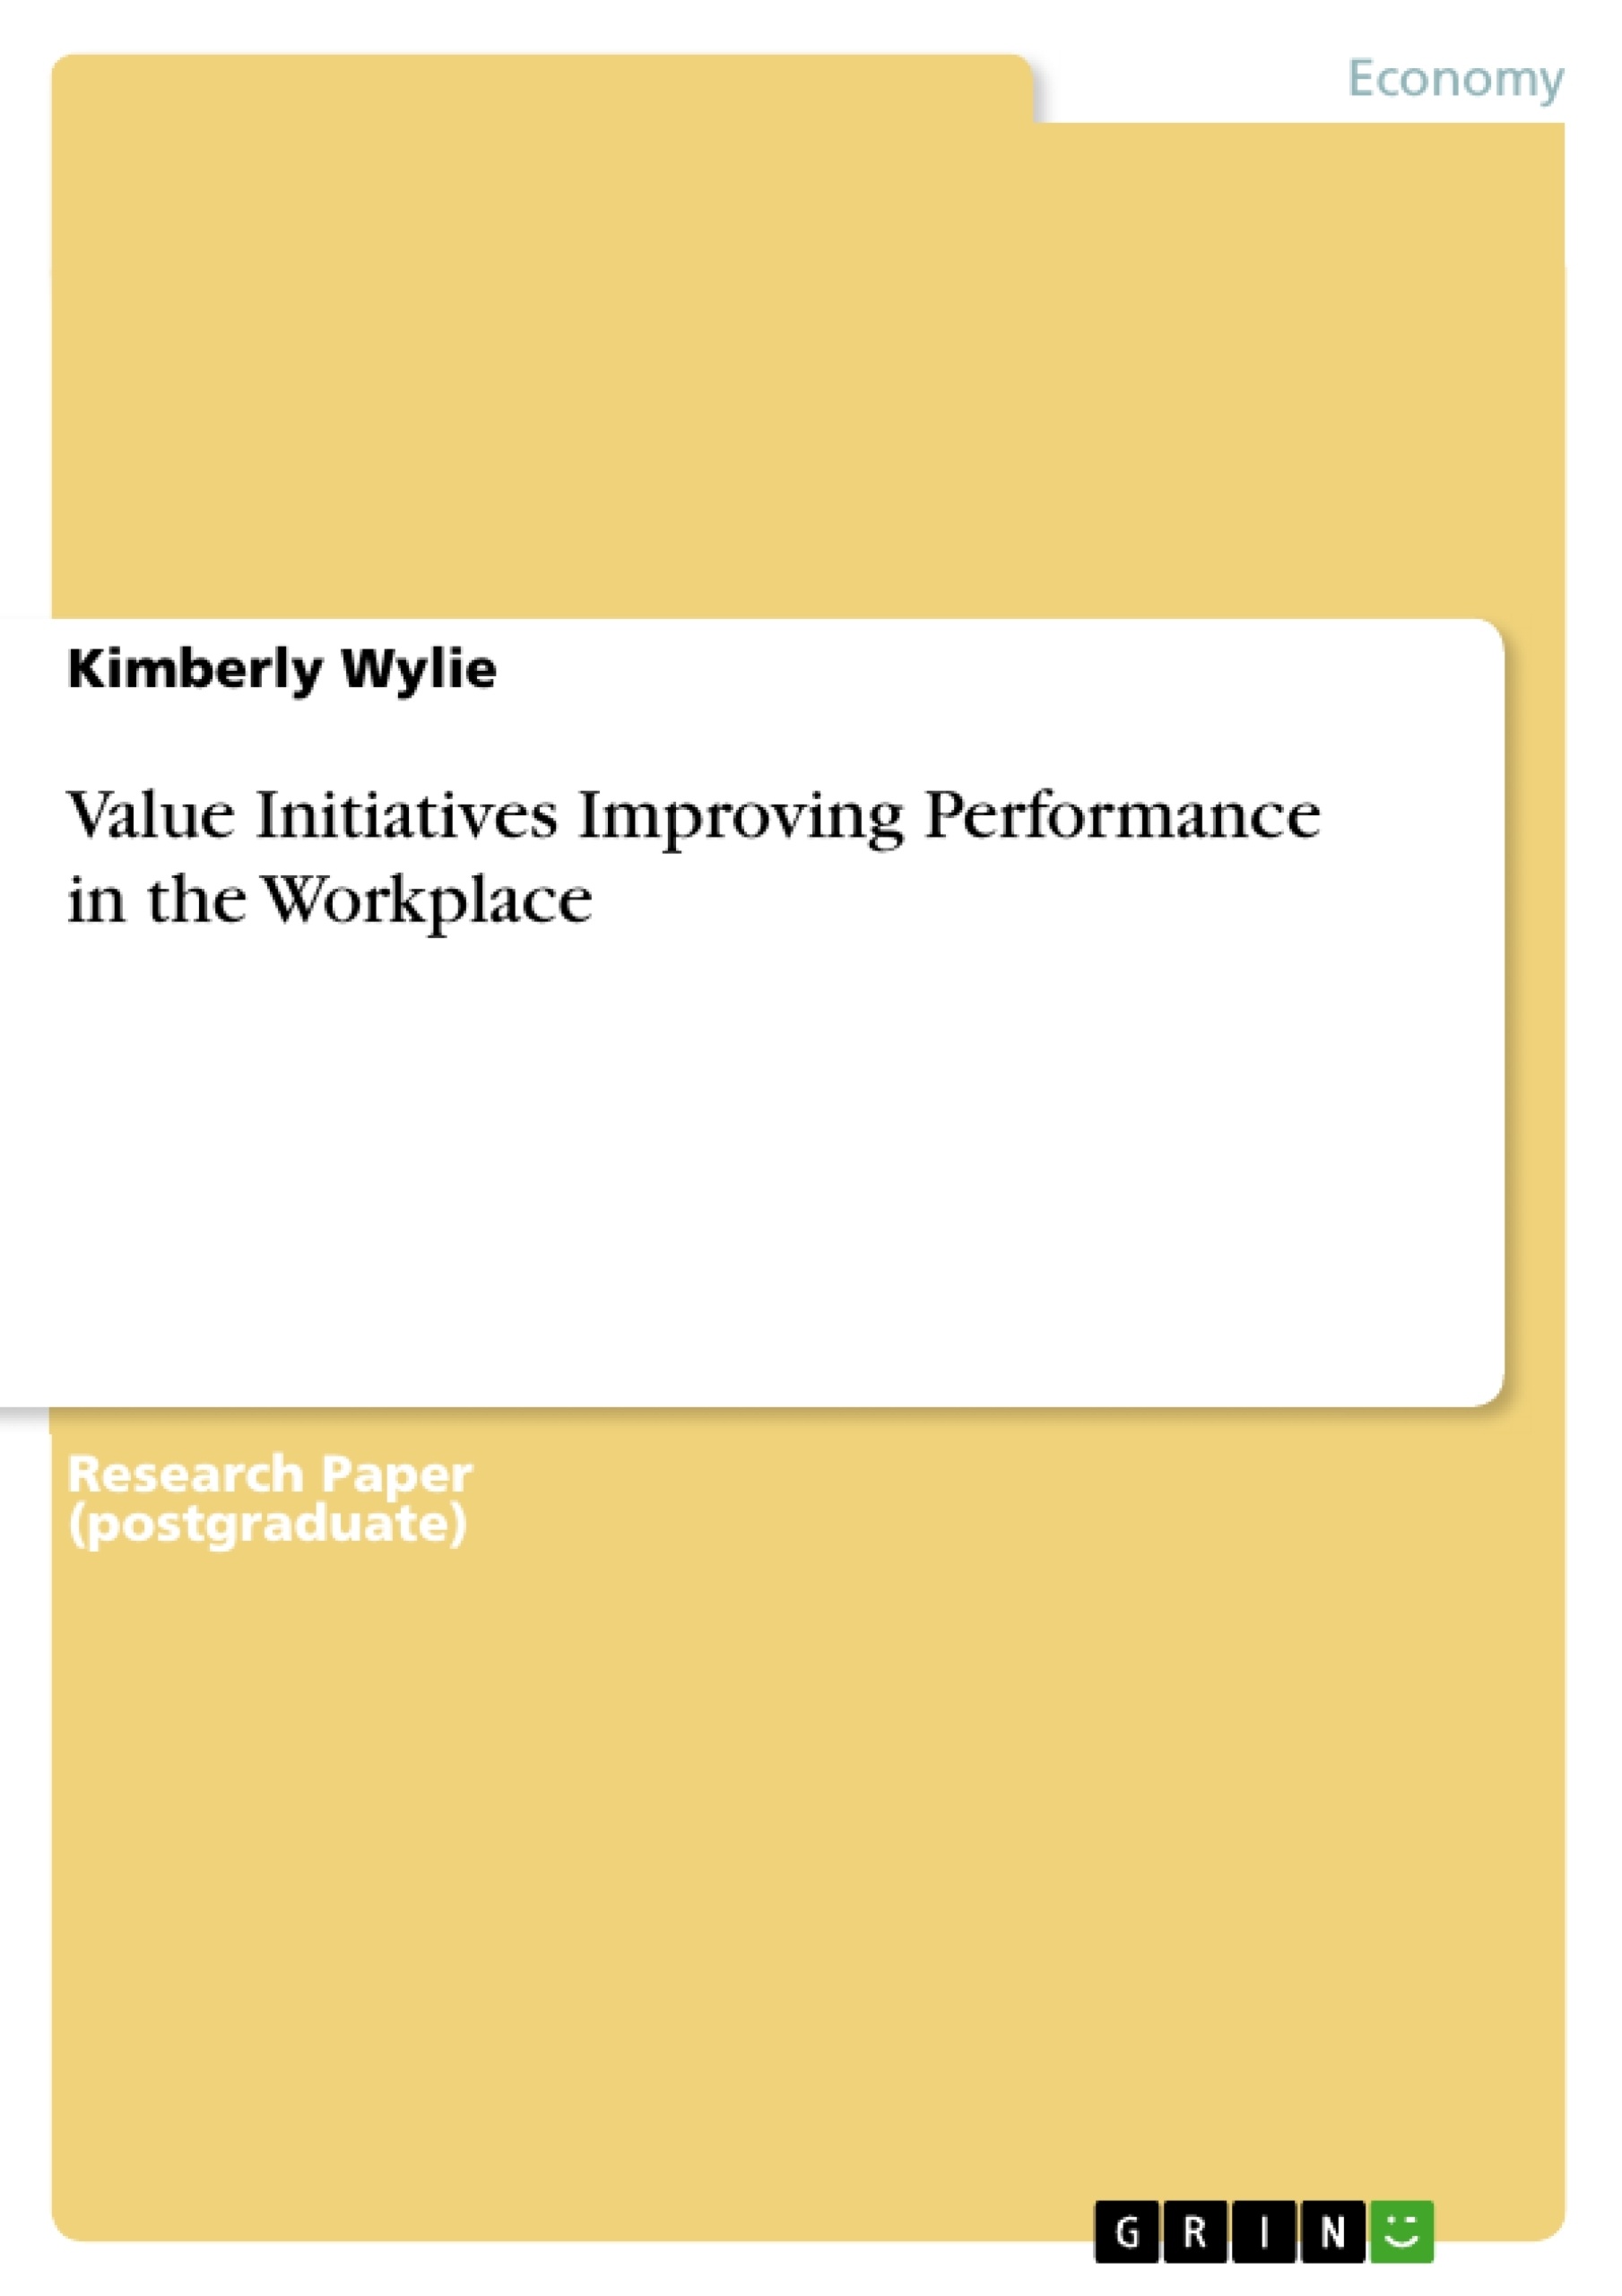 Title: Value Initiatives Improving Performance in the Workplace